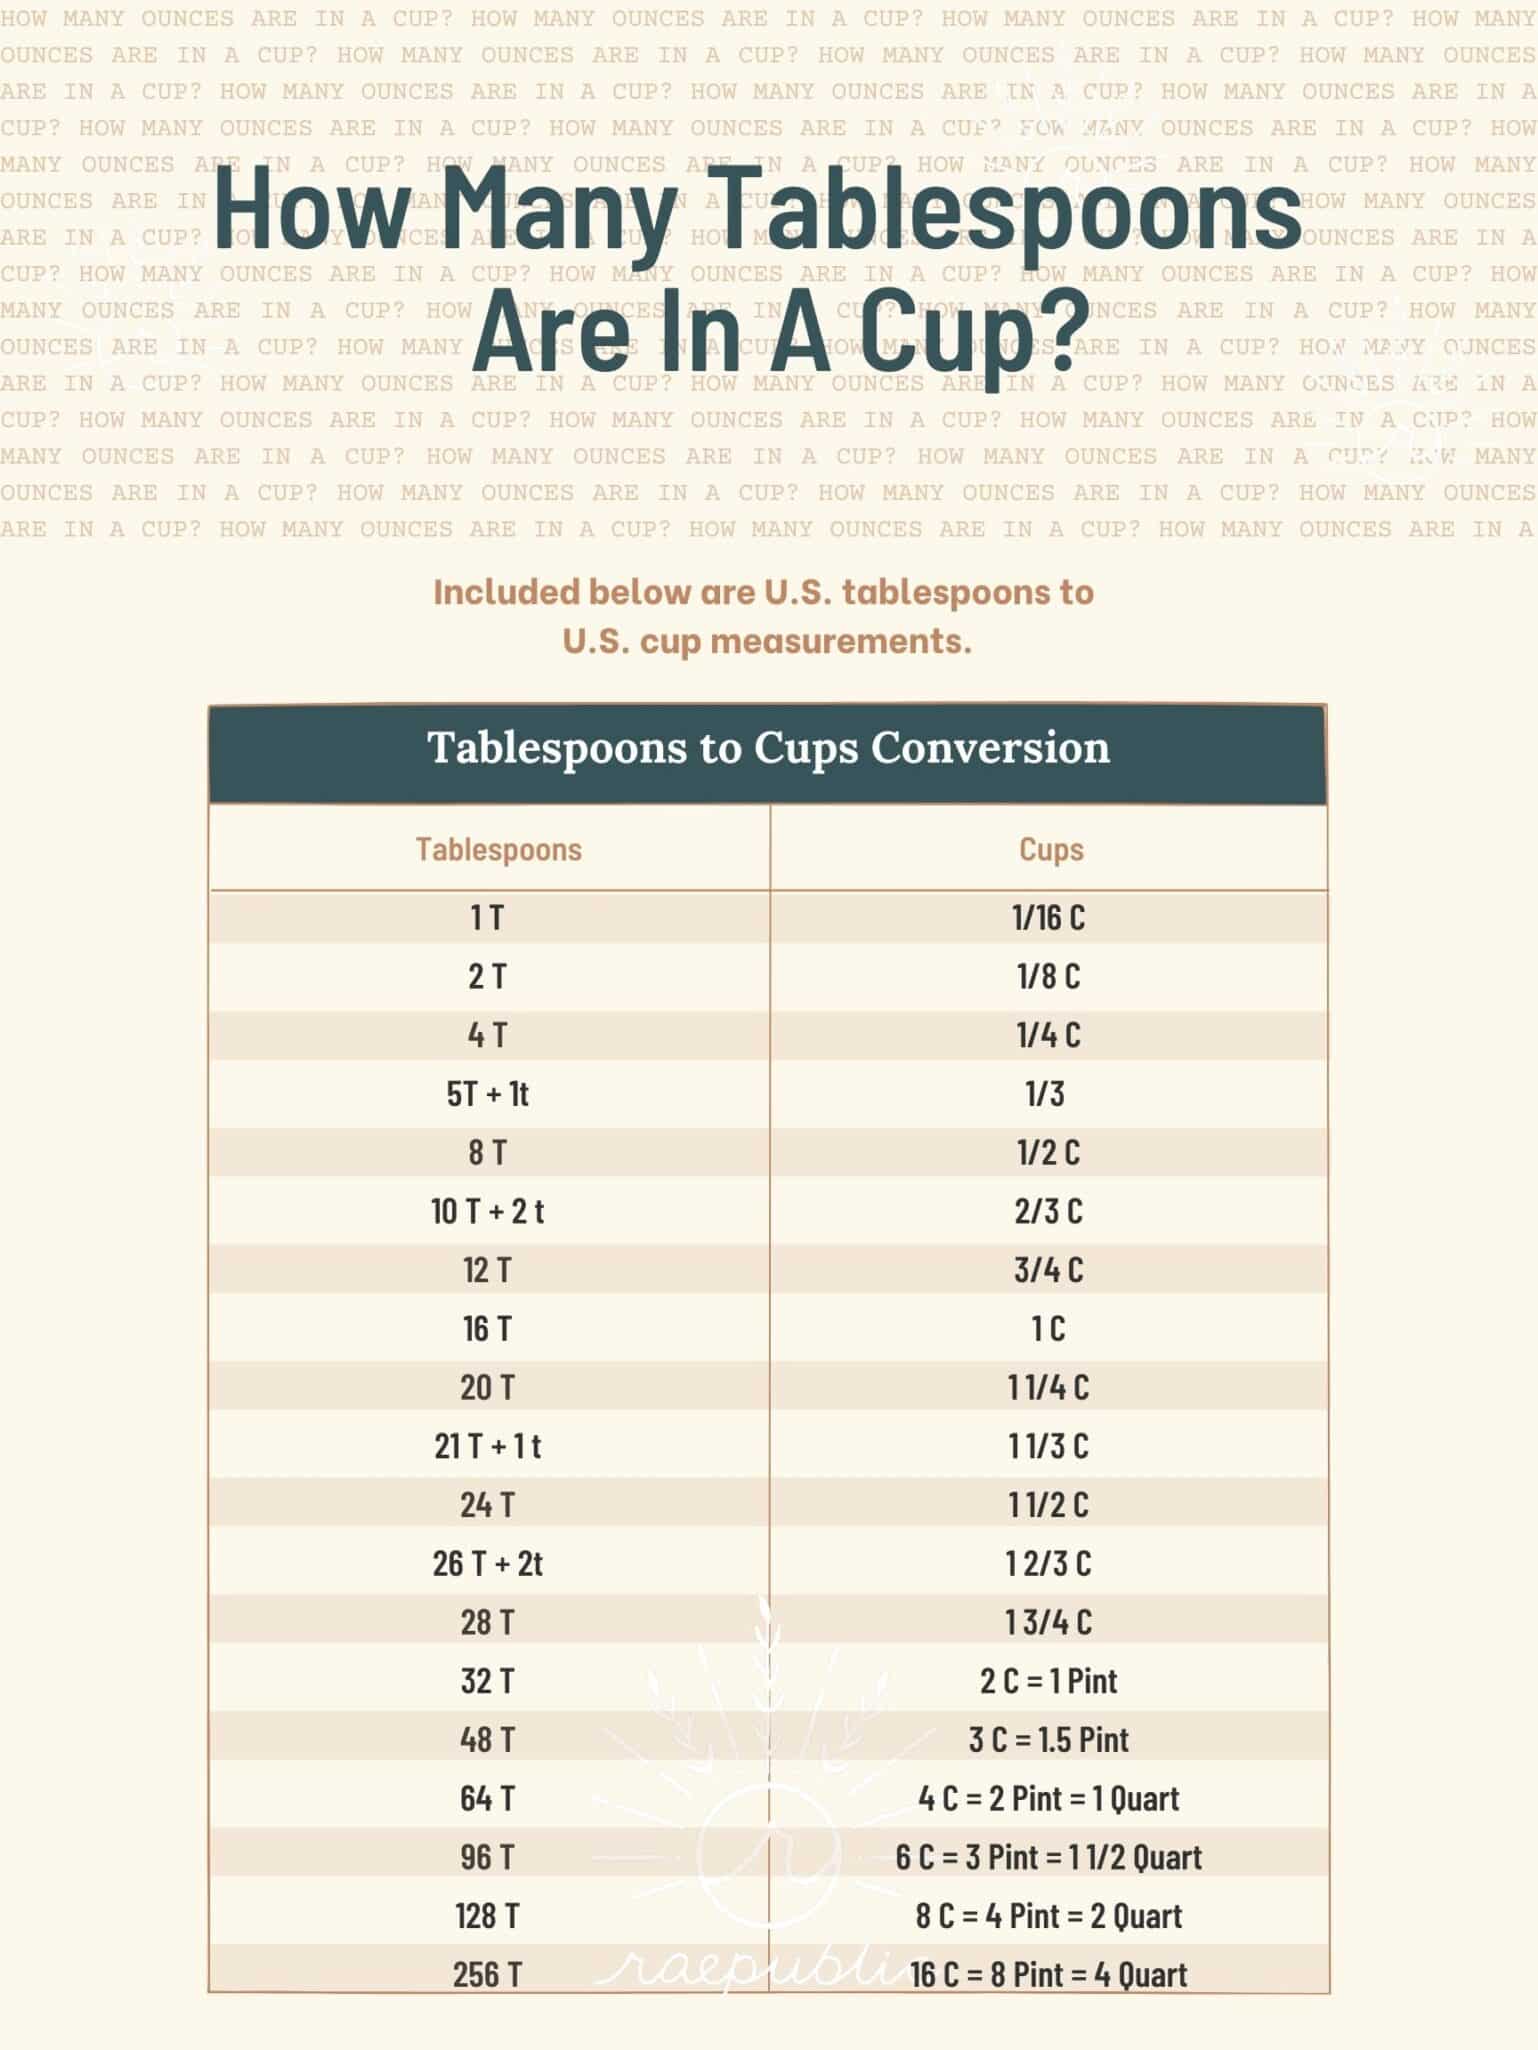 https://raepublic.com/wp-content/uploads/2023/04/Tablespoons-to-cups-free-download-conversion-chart-by-Raepublic-scaled.jpg